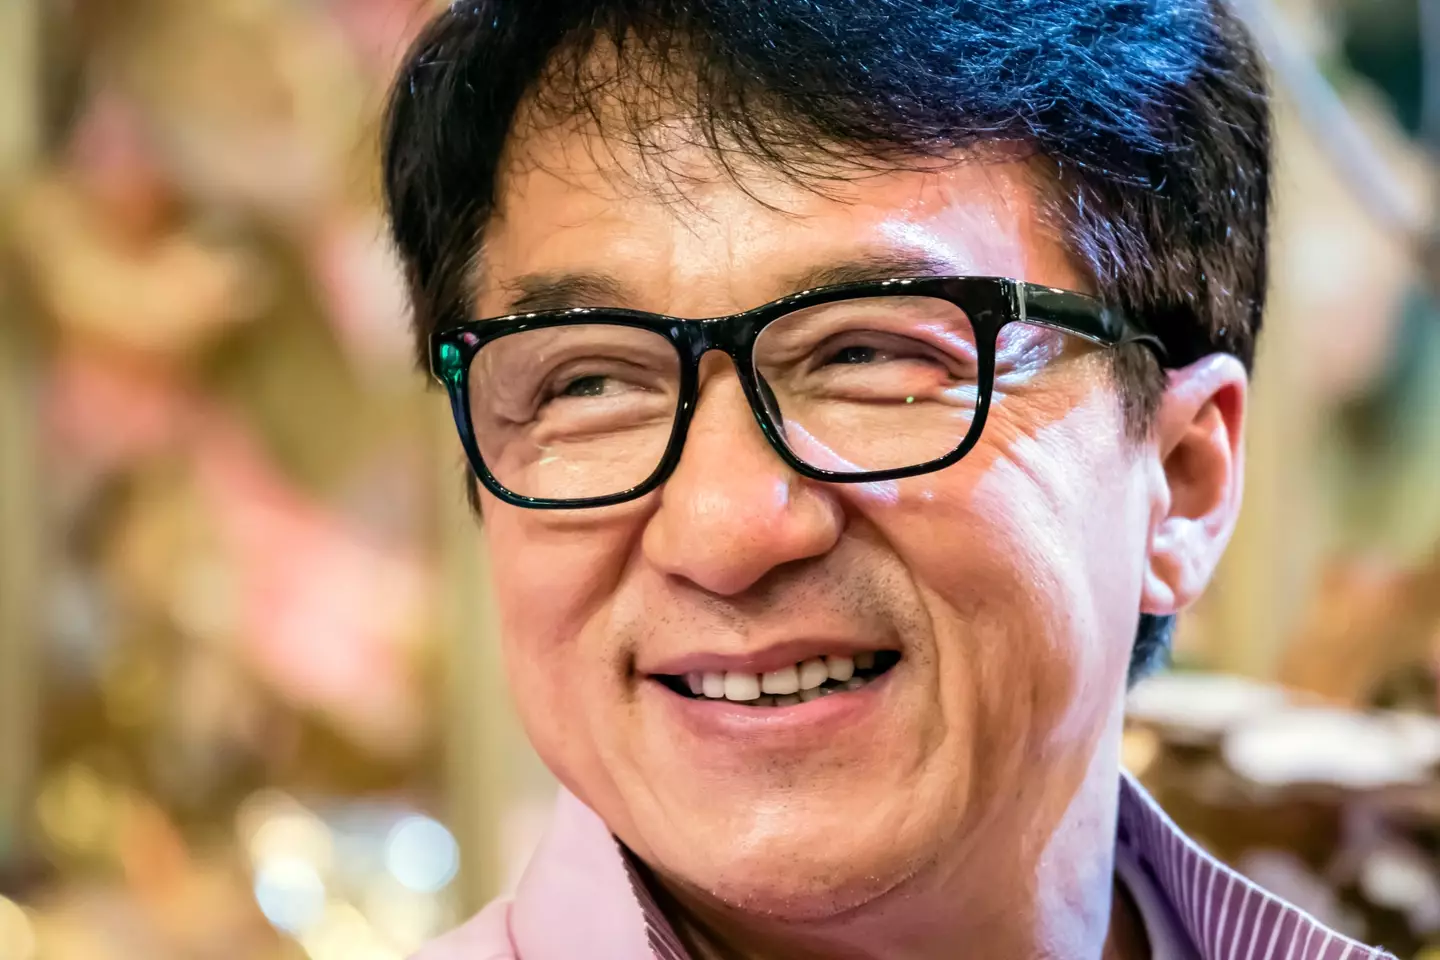 Jackie Chan was still learning English when he arrived in the US to make his Hollywood debut.